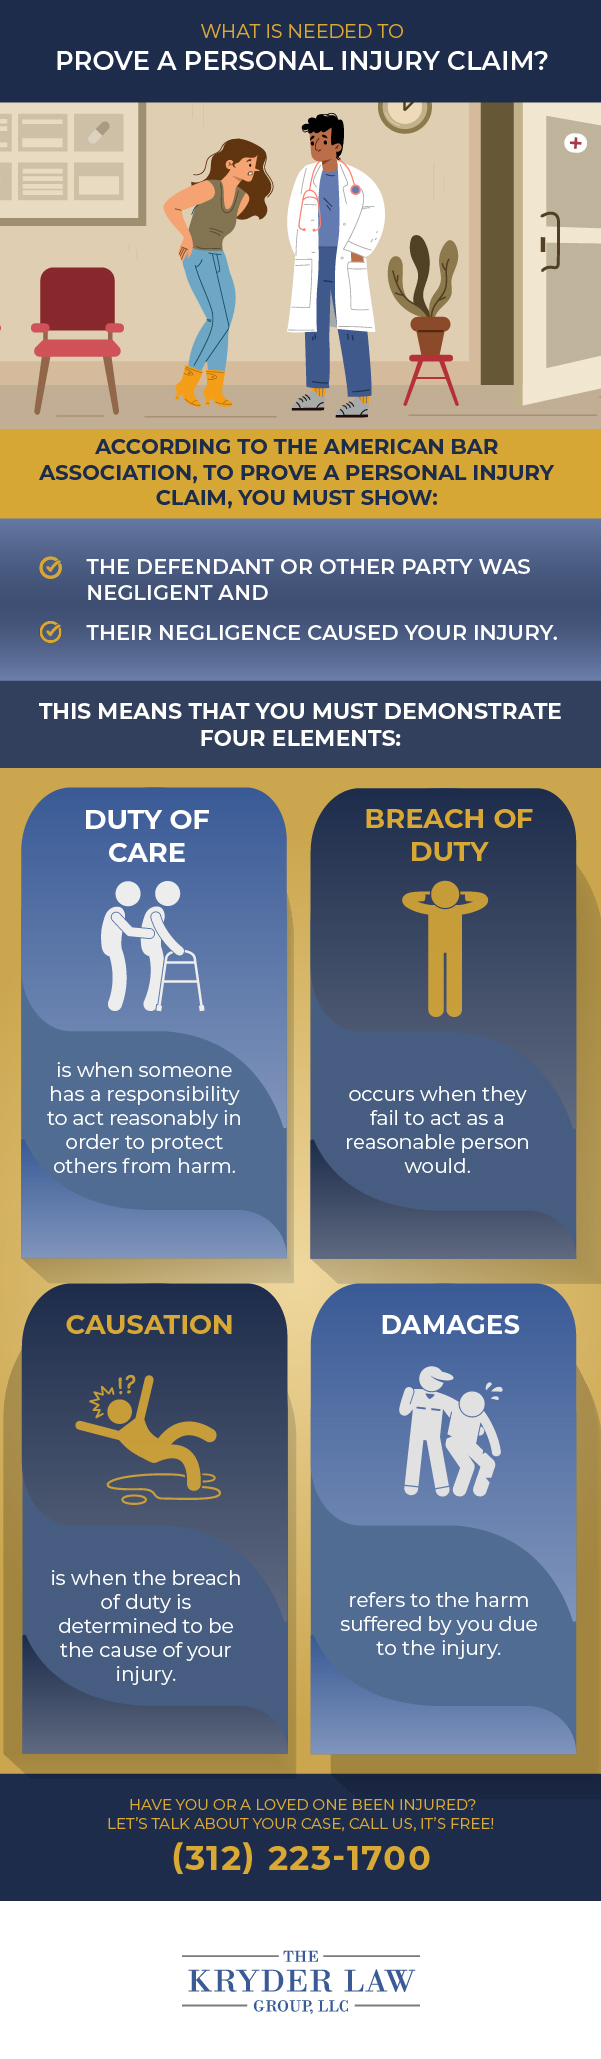 What Is Needed to Prove a Personal Injury Claim?